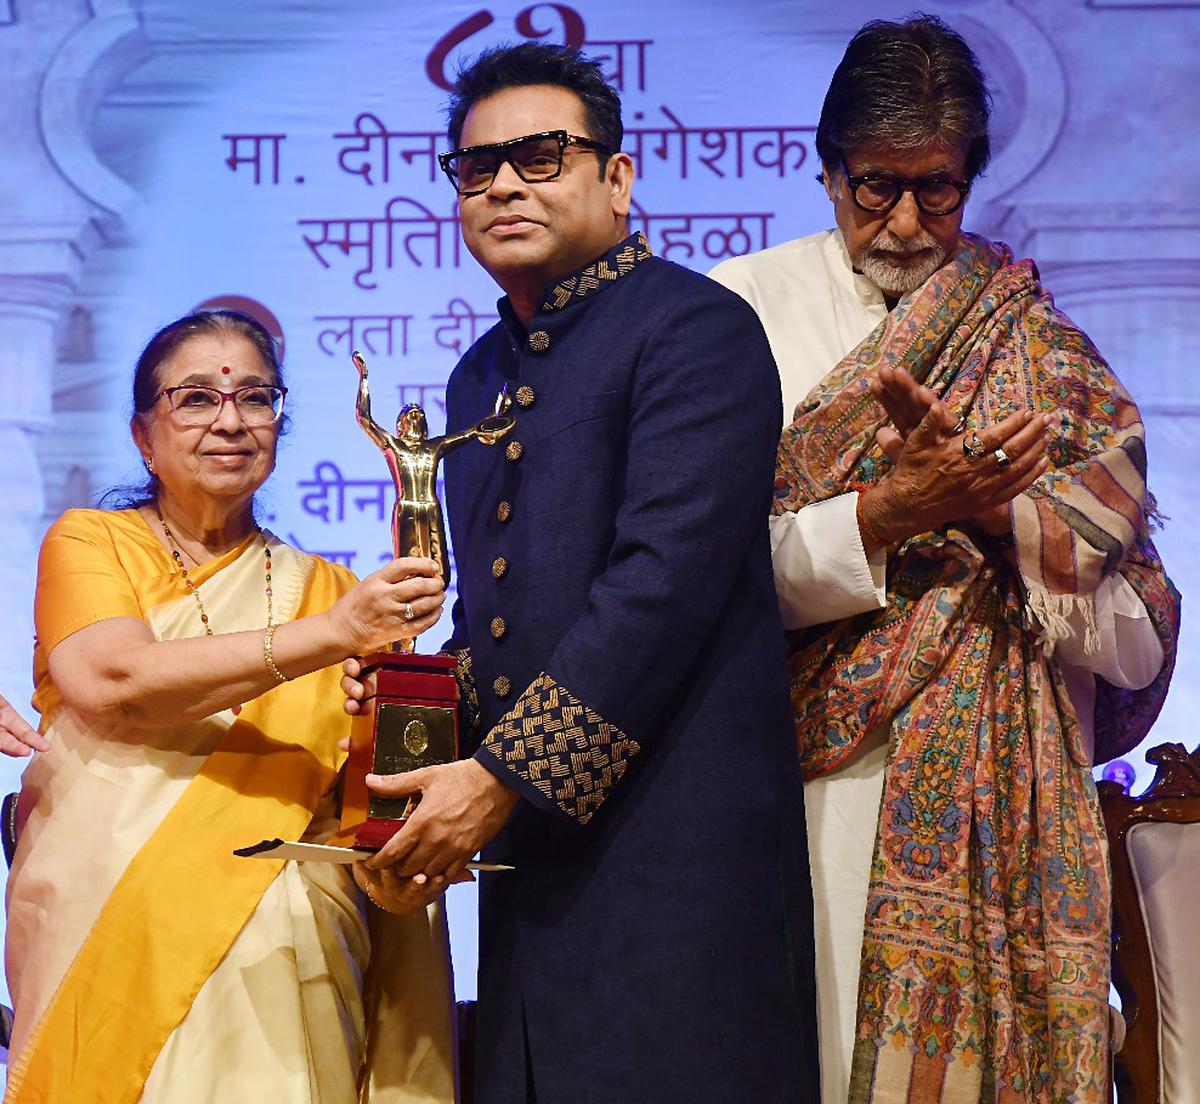 Music composer AR Rahman being conferred with the Lata Deenanath Mangeshkar Award by veteran singer Usha Mangeshkar during the Deenanath Mangeshkar Awards ceremony, in Mumbai on Wednesday. Actor Amitabh Bachchan are also seen.